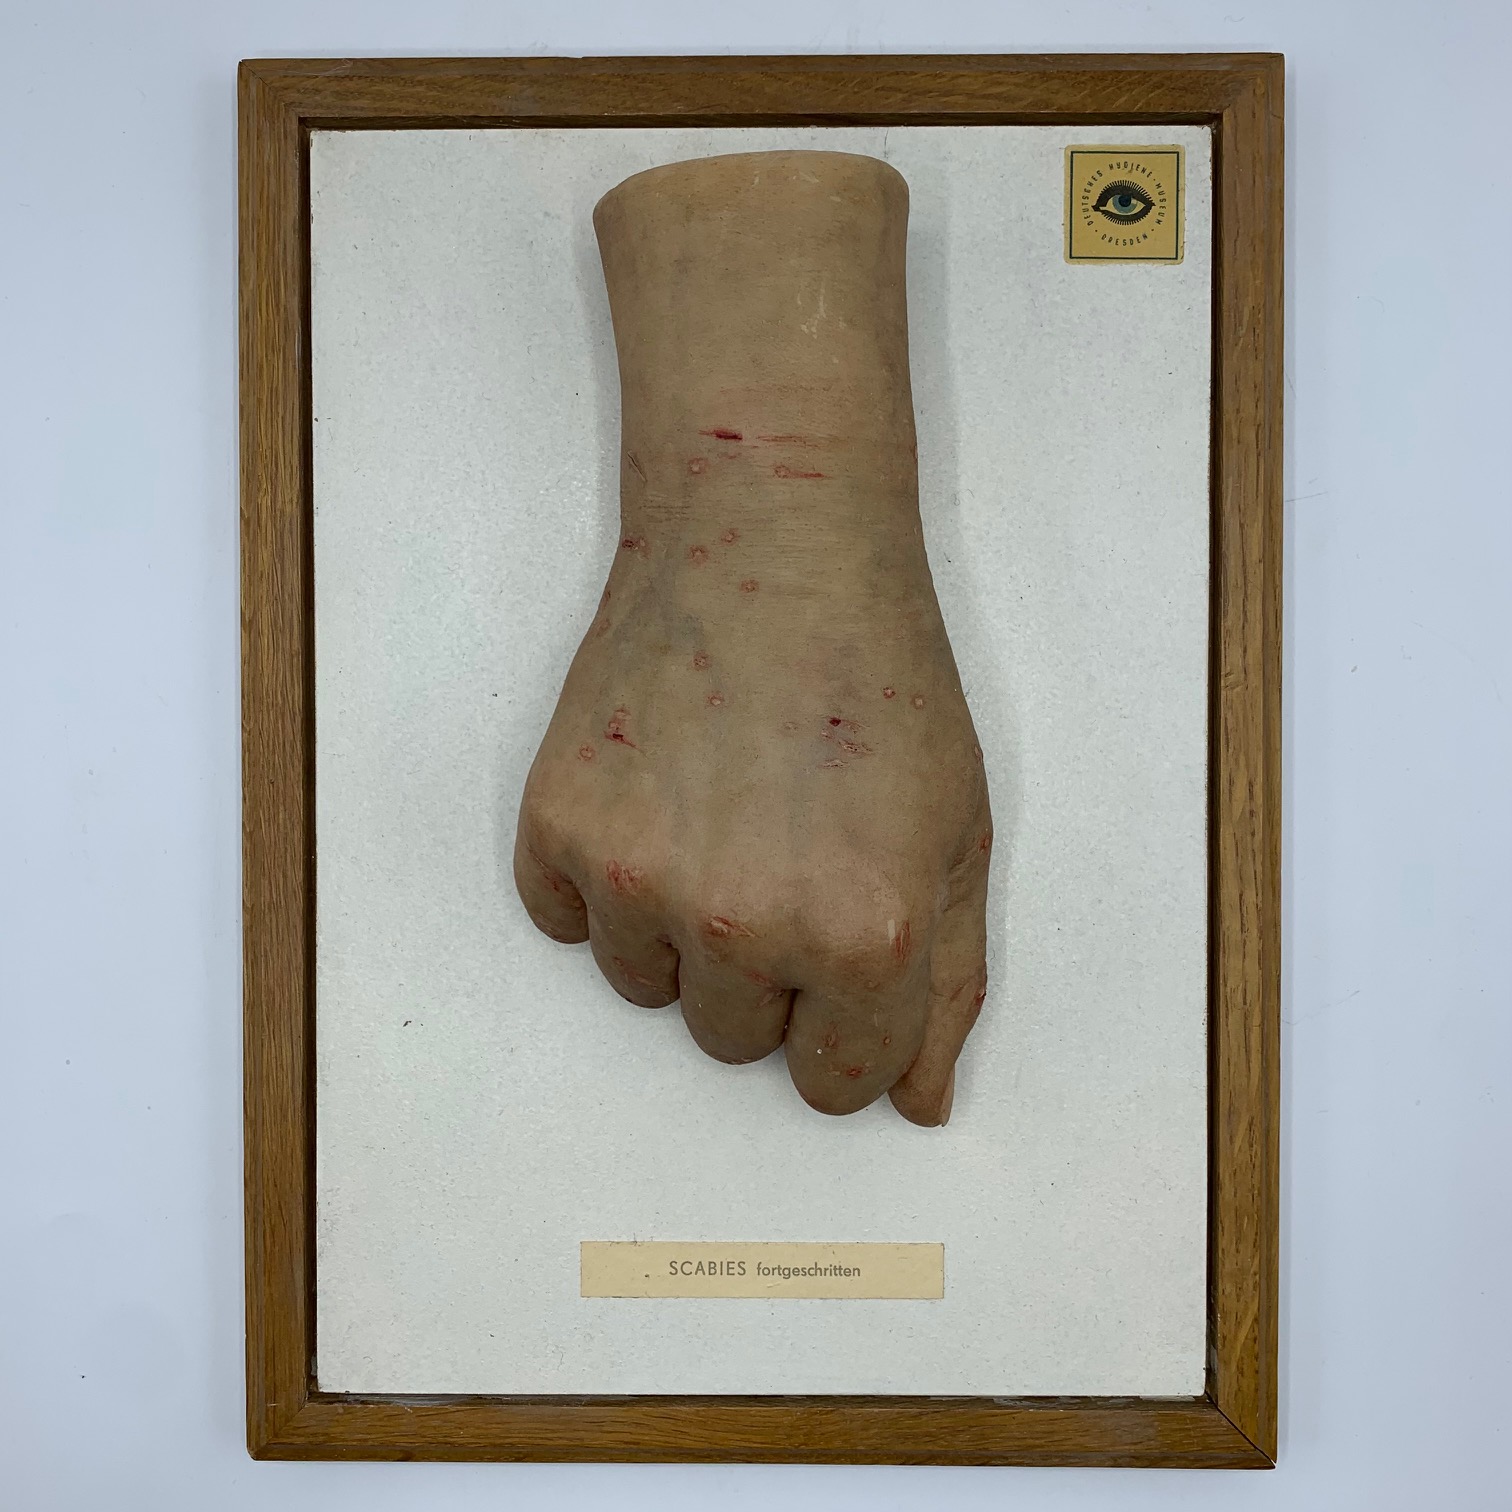 Anatomical wax model by the German maker Hygiene Museum of Dresden, scabies